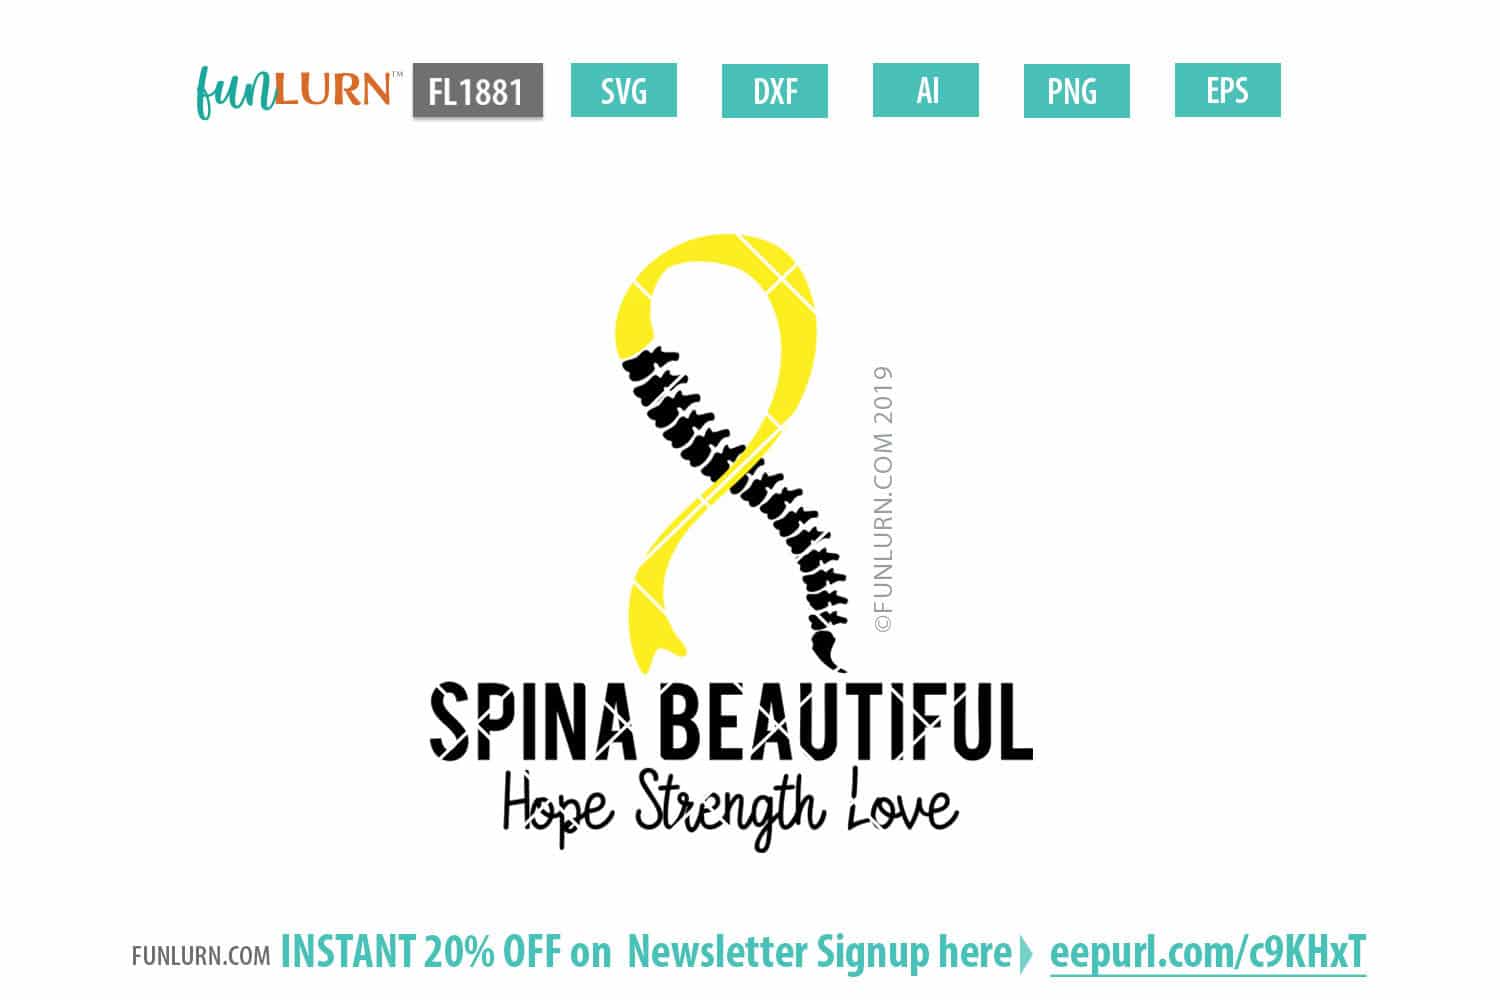 5. Spina Bifida Ribbon and Butterfly Tattoo - wide 4